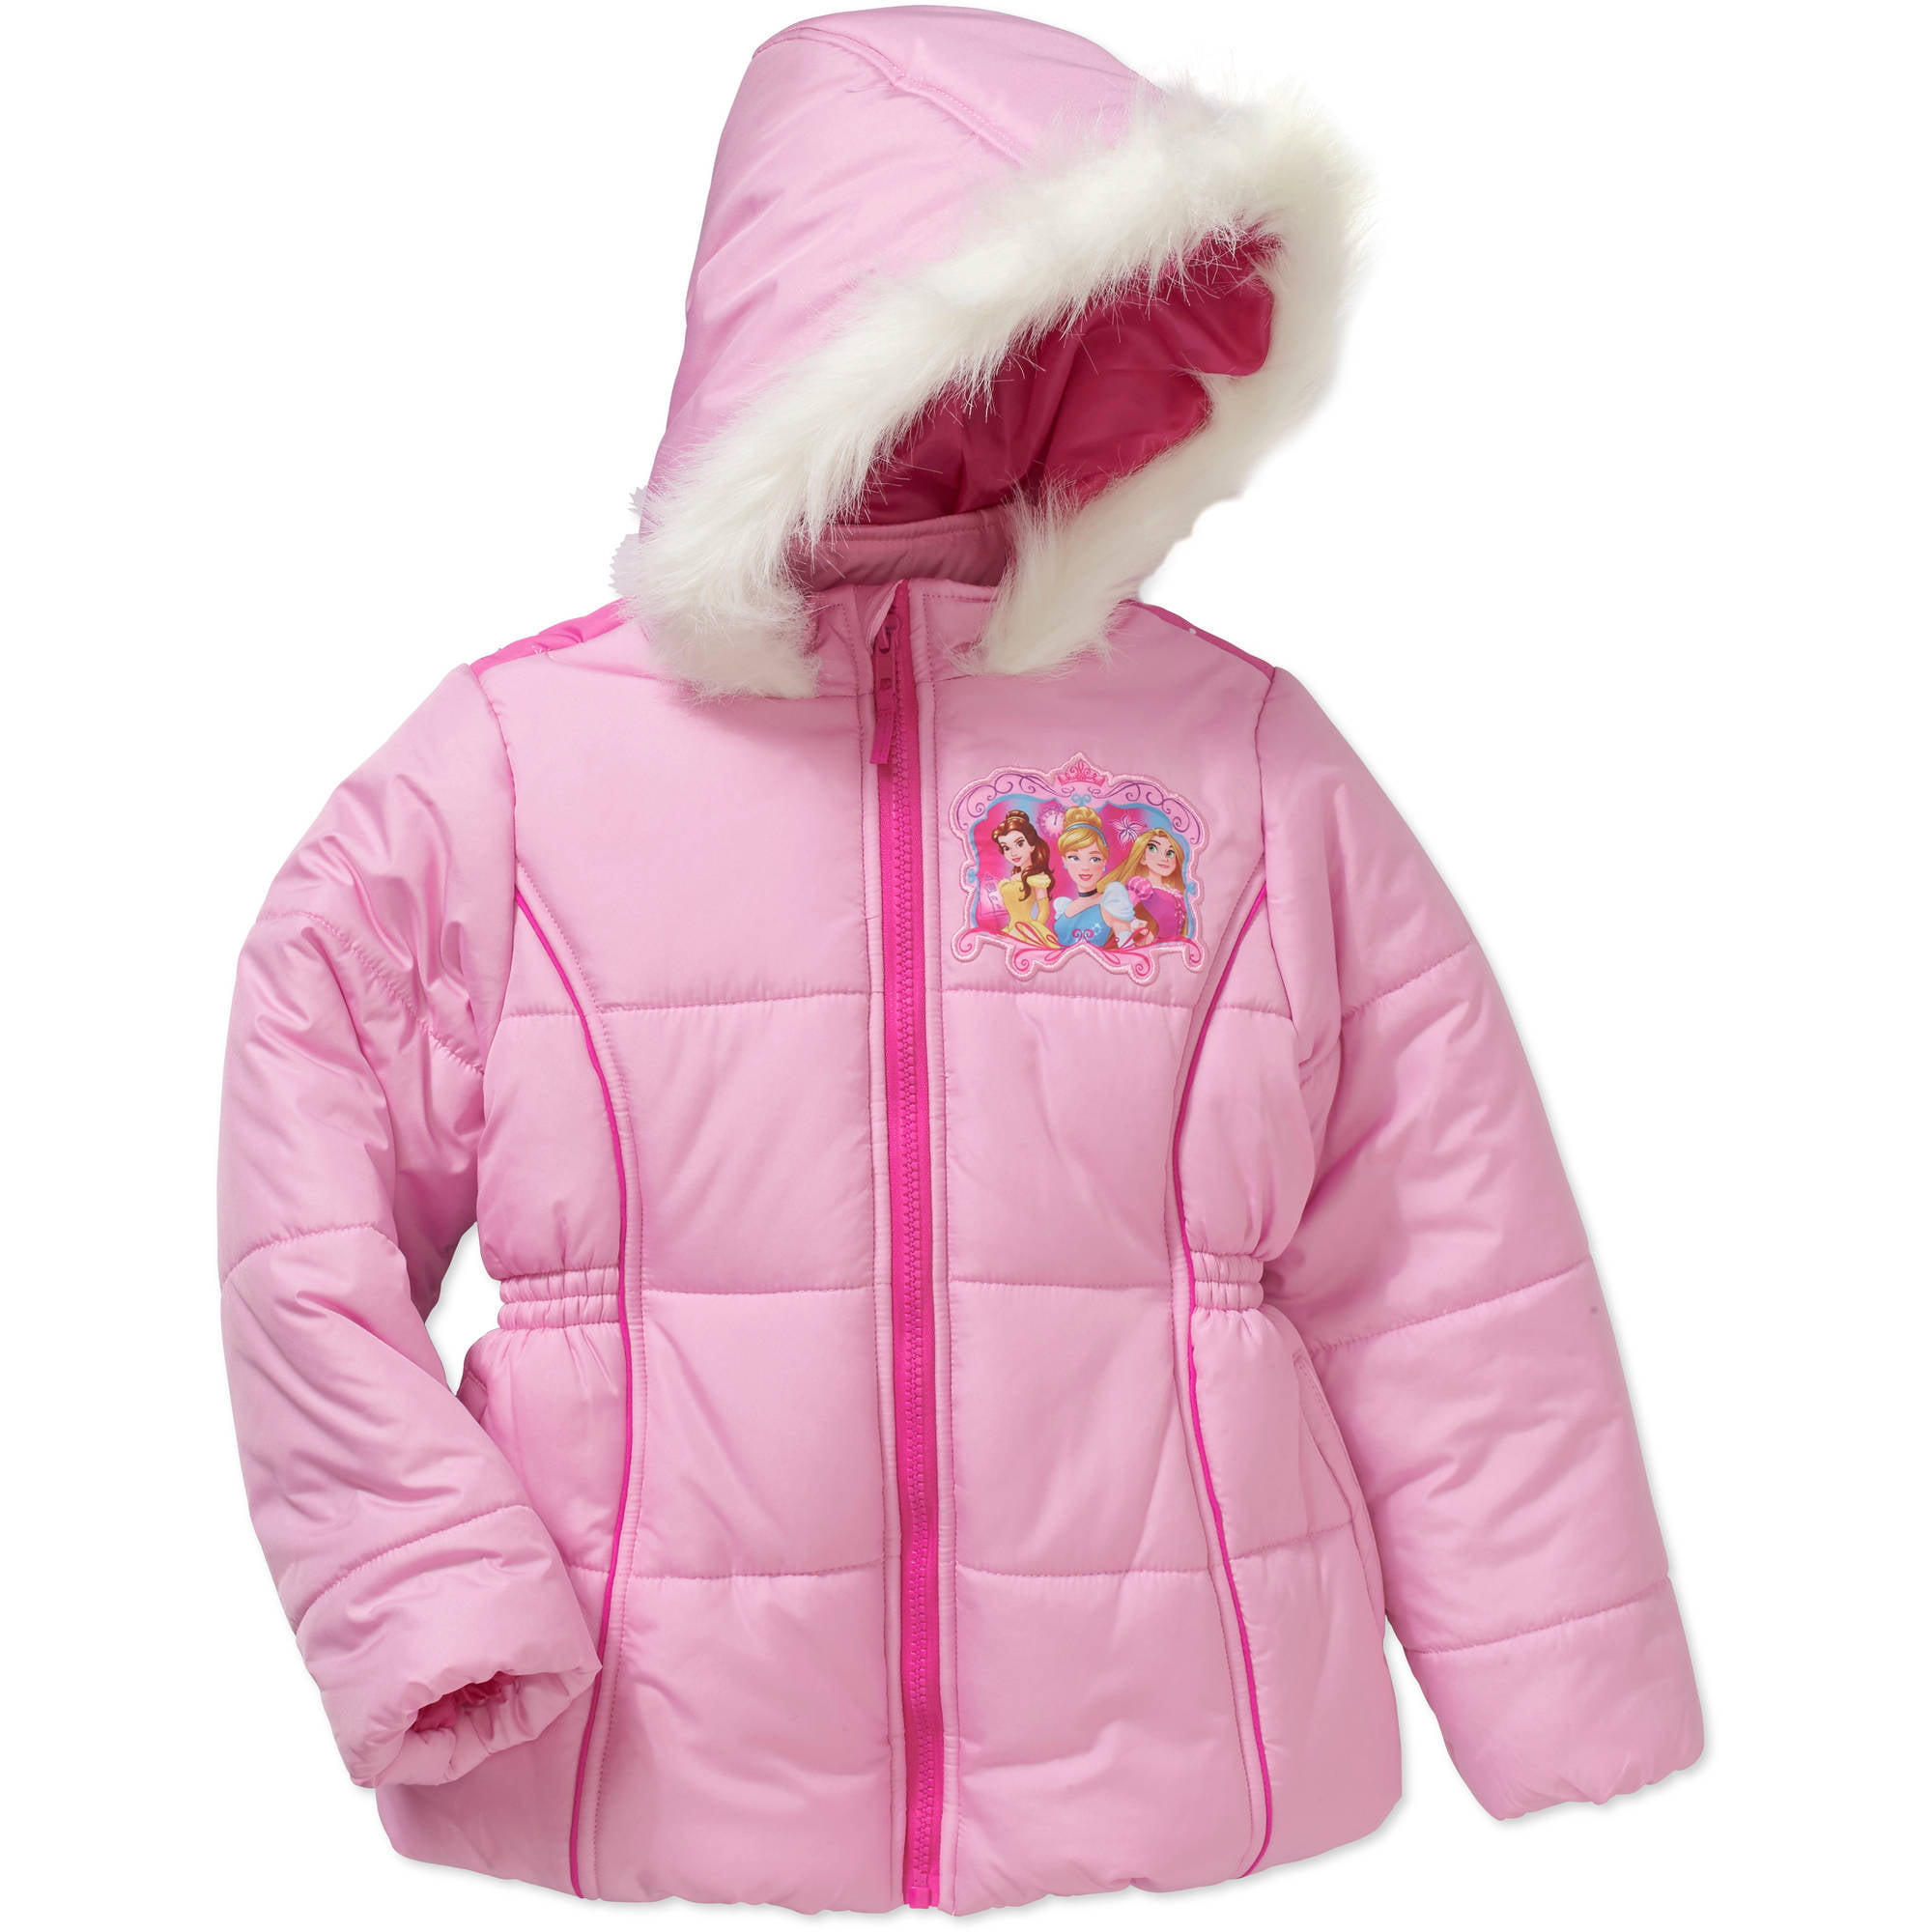 Character Wear Princesss Padded Coat Girls Pink Jacket Outerwear